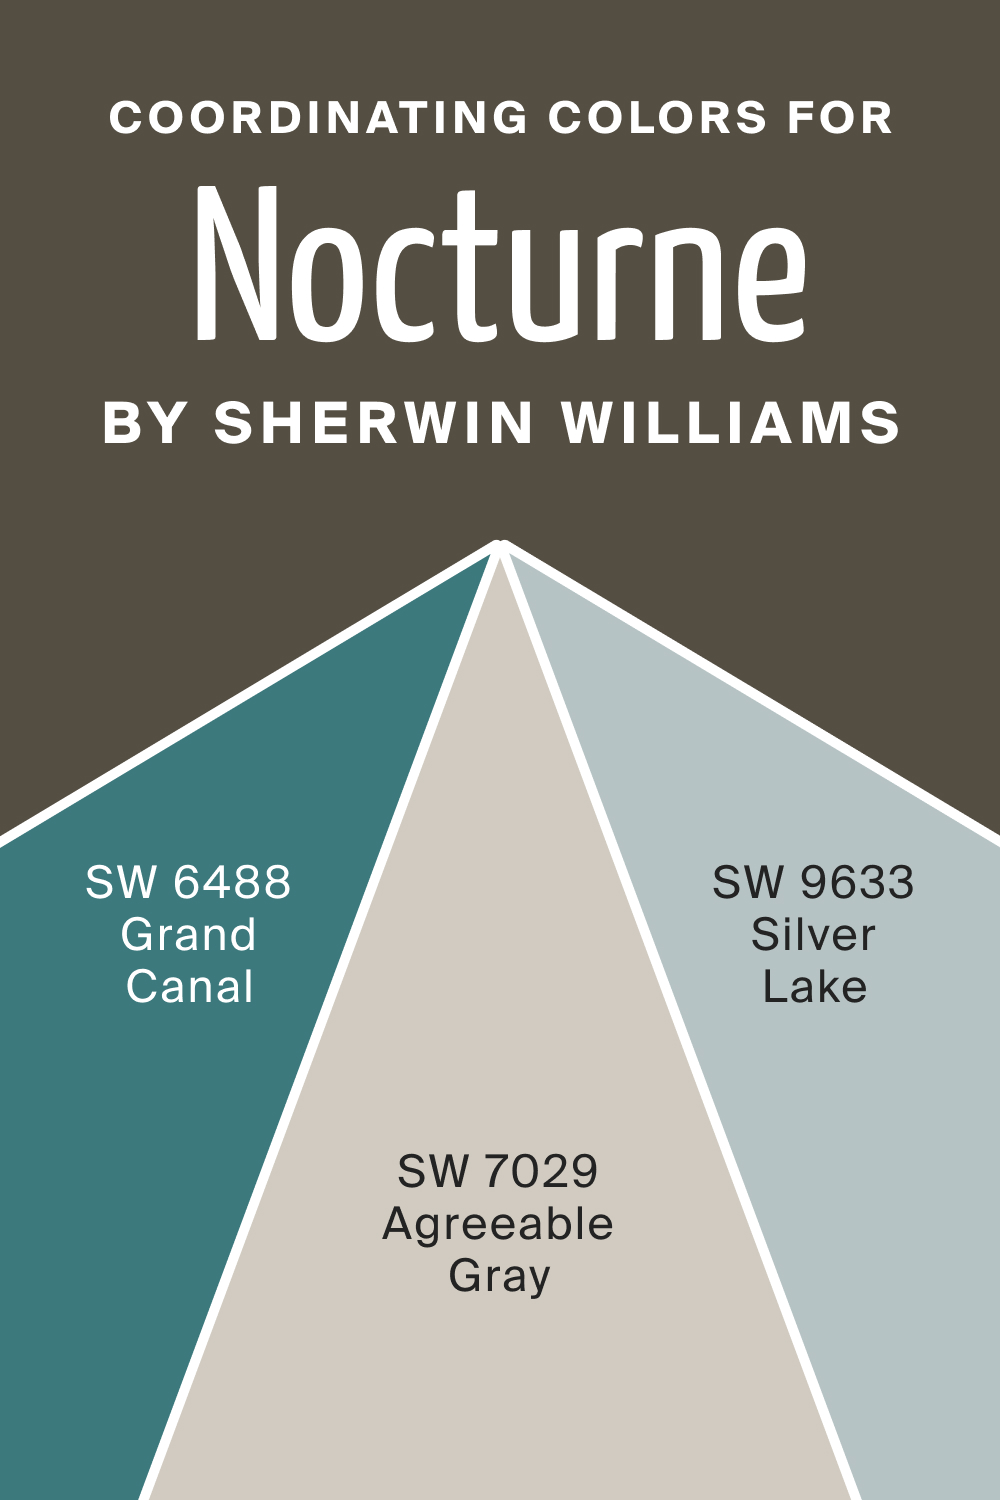 Coordinating Colors for SW 9520 Nocturne by Sherwin Williams